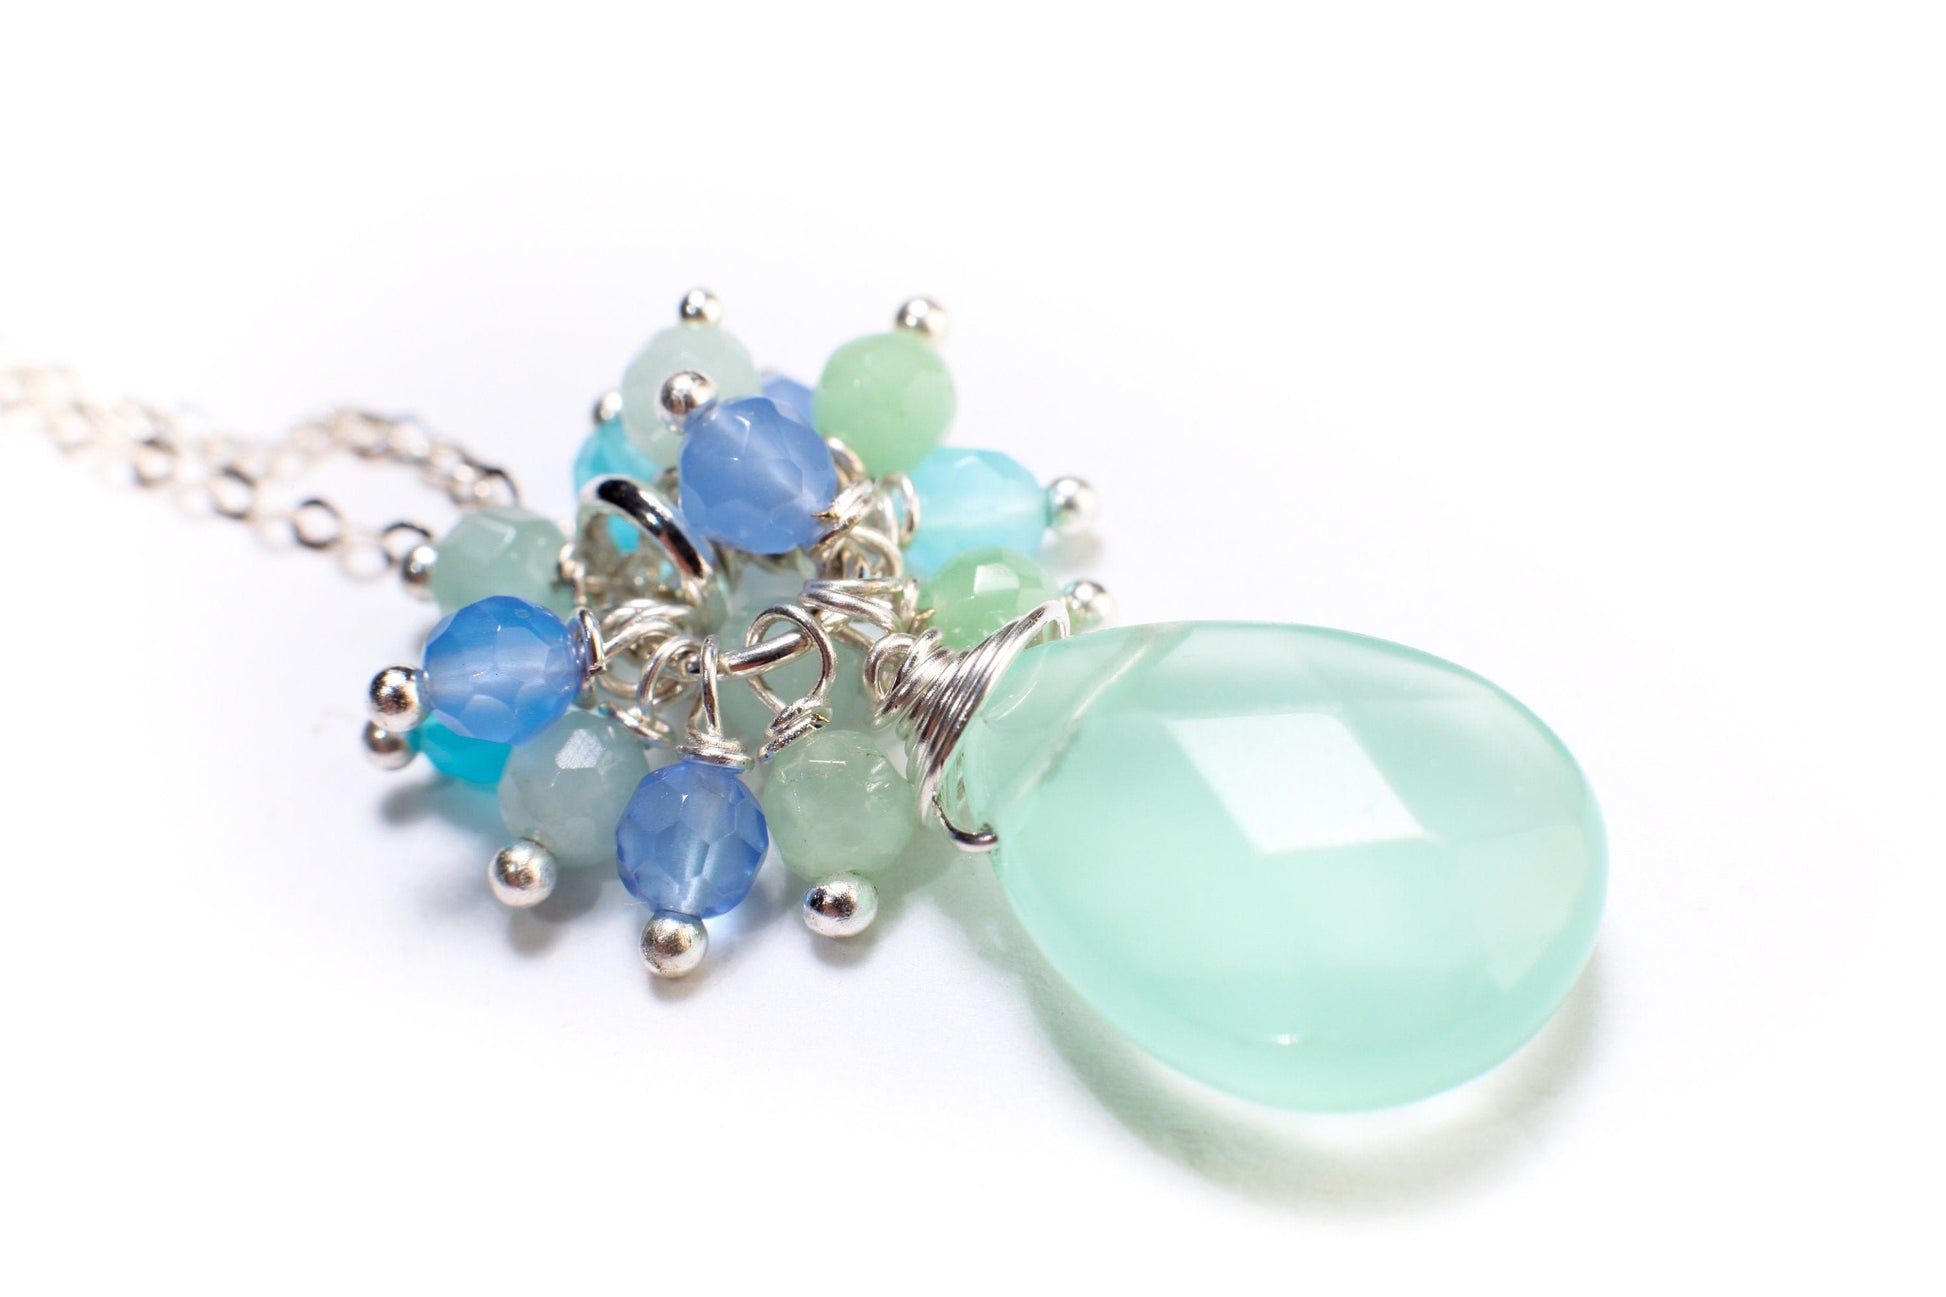 Natural Aqua Chalcedony Faceted Pear Drop 13x21mm, Wire Wrapped Faceted 4mm Sky Blue Quartz Clusters in 927 Sterling Silver Clasp and Chain